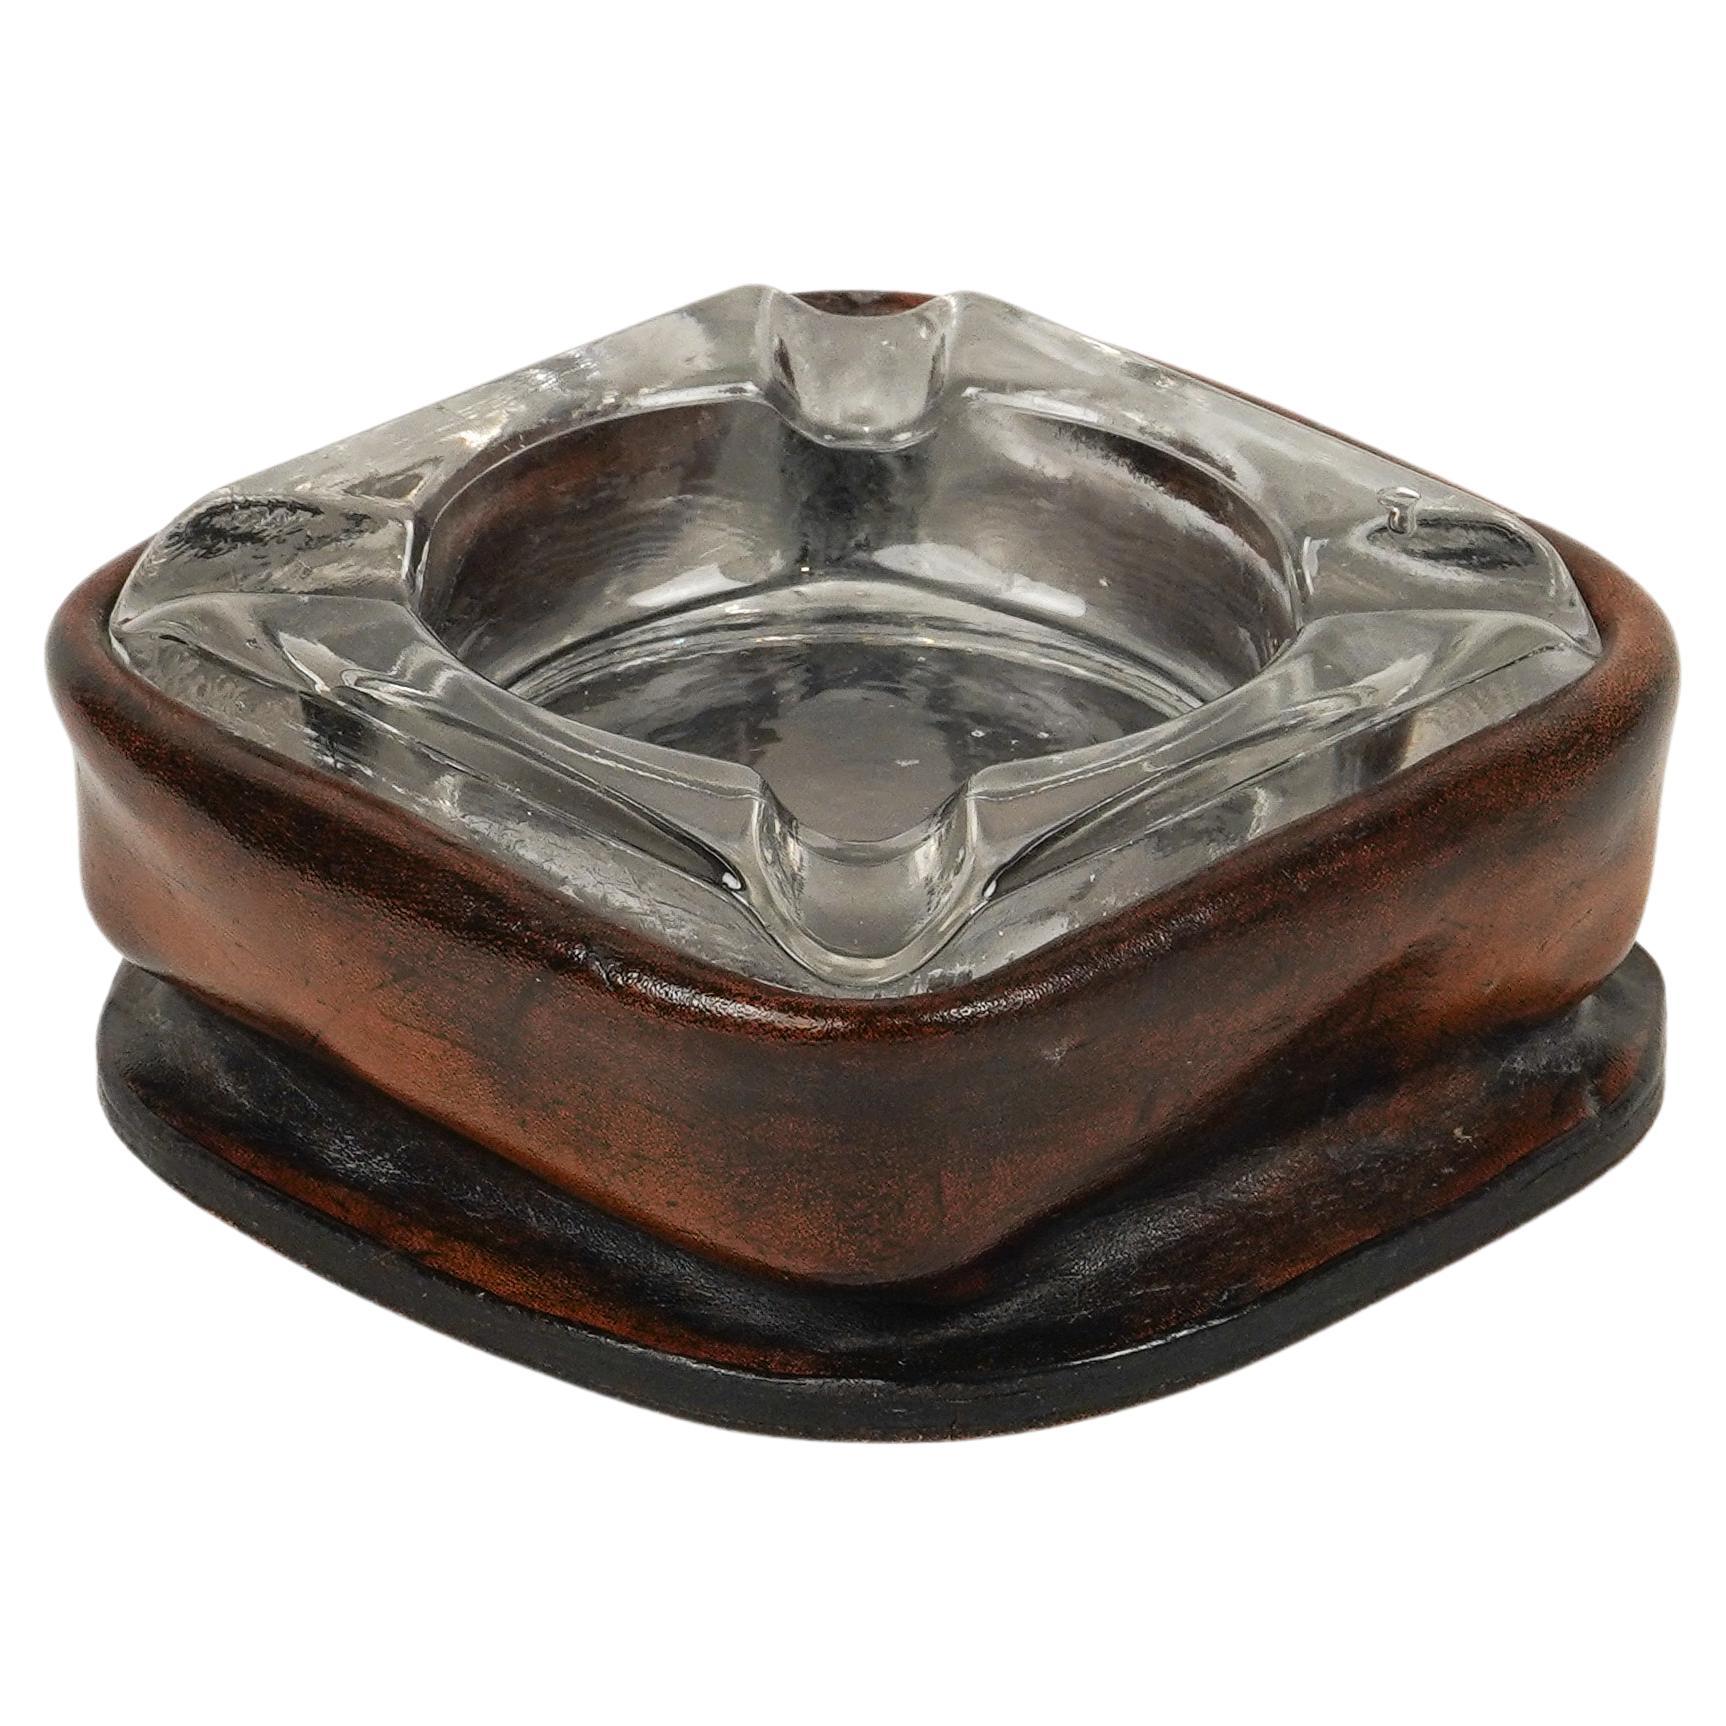 Midcentury Squared Ashtray in Leather and Glass Jacques Adnet Style, Italy 1970s For Sale